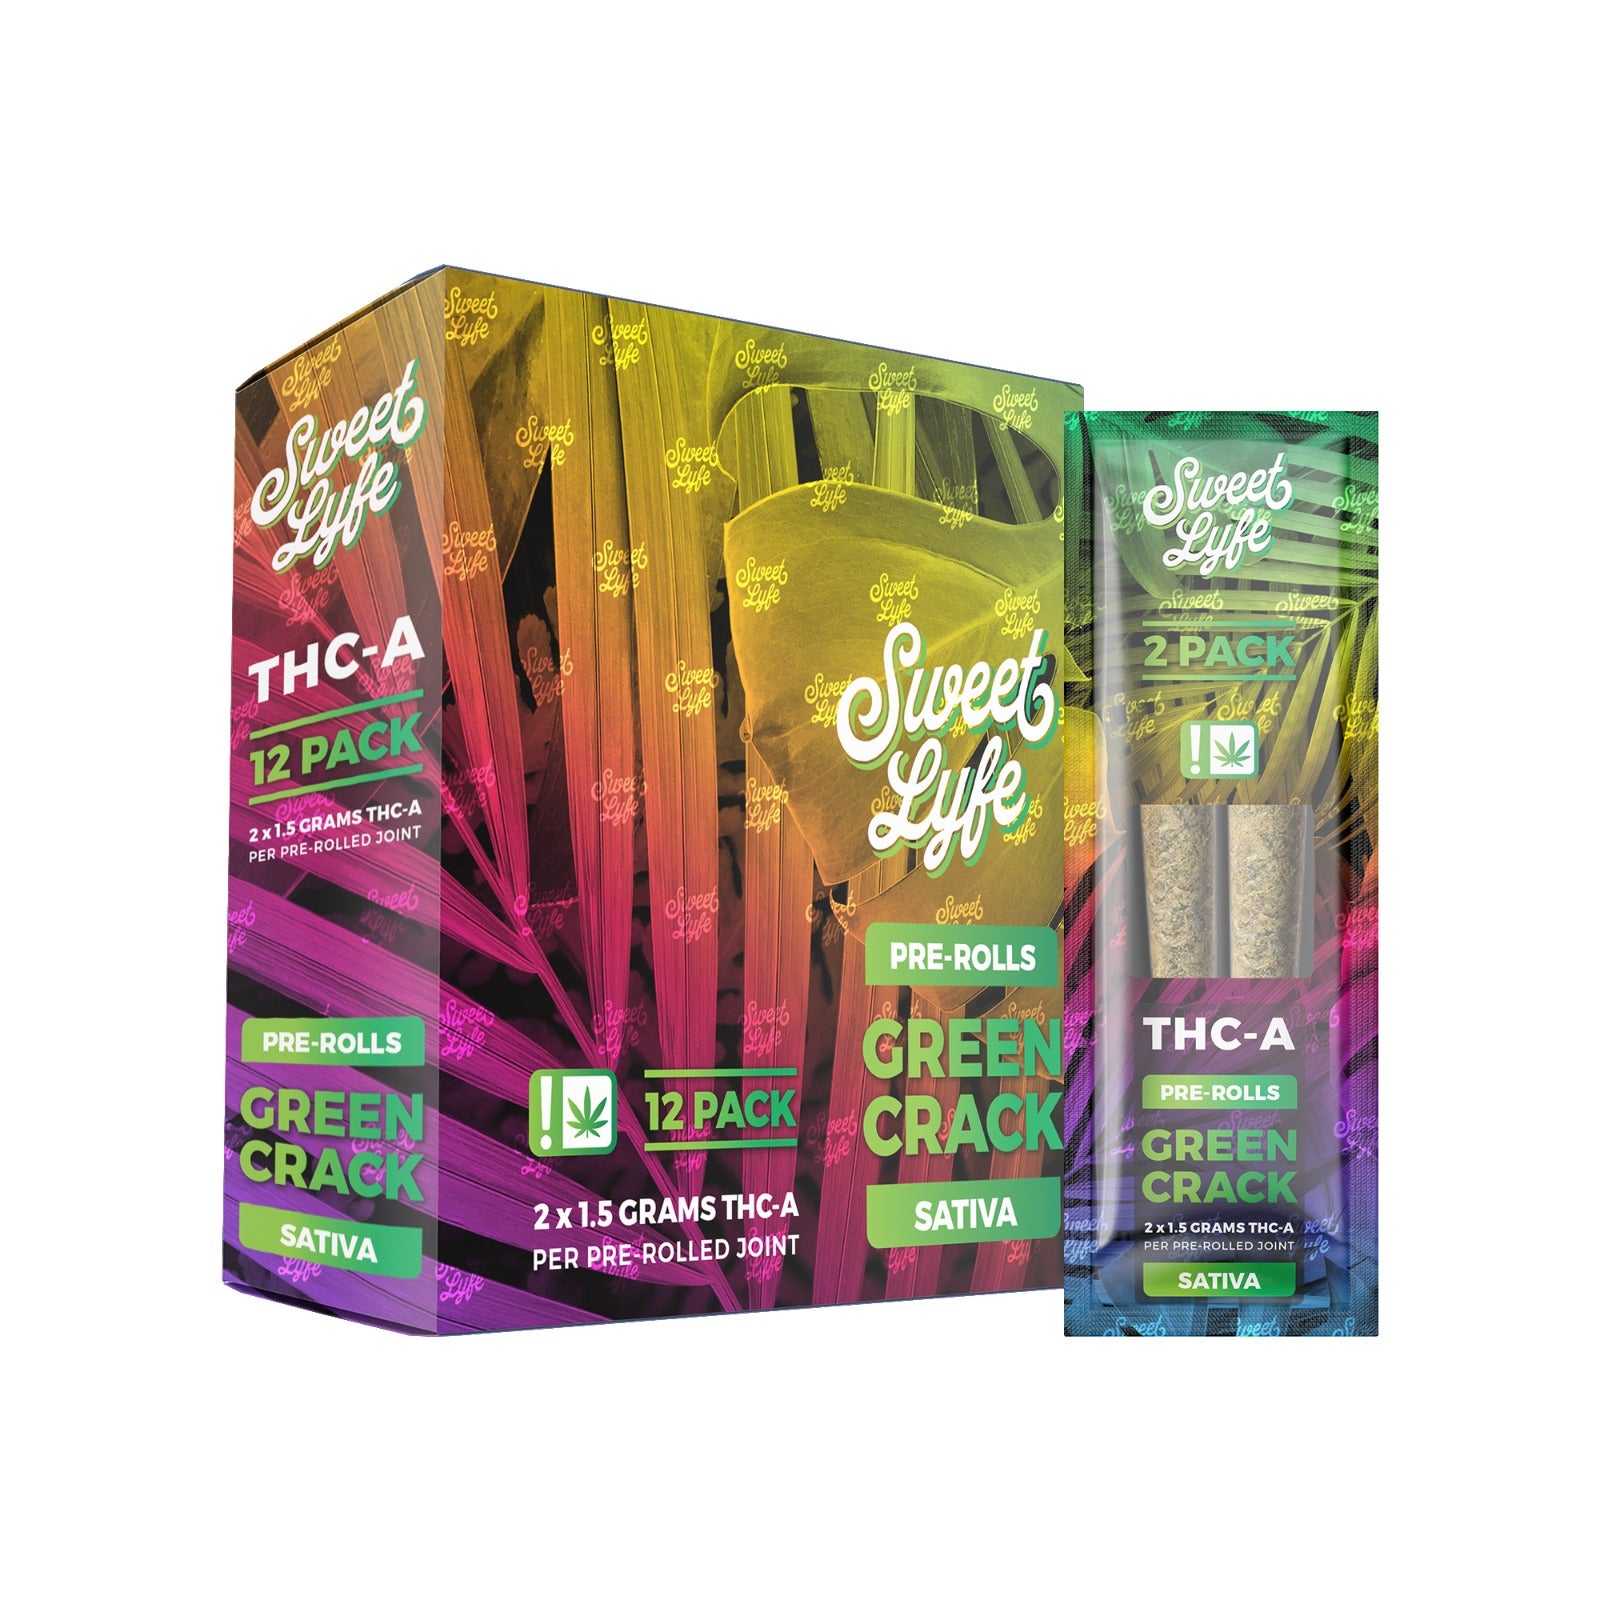 2 Pack Pre-Rolls Joint THC-A|Green Crack - Sativa